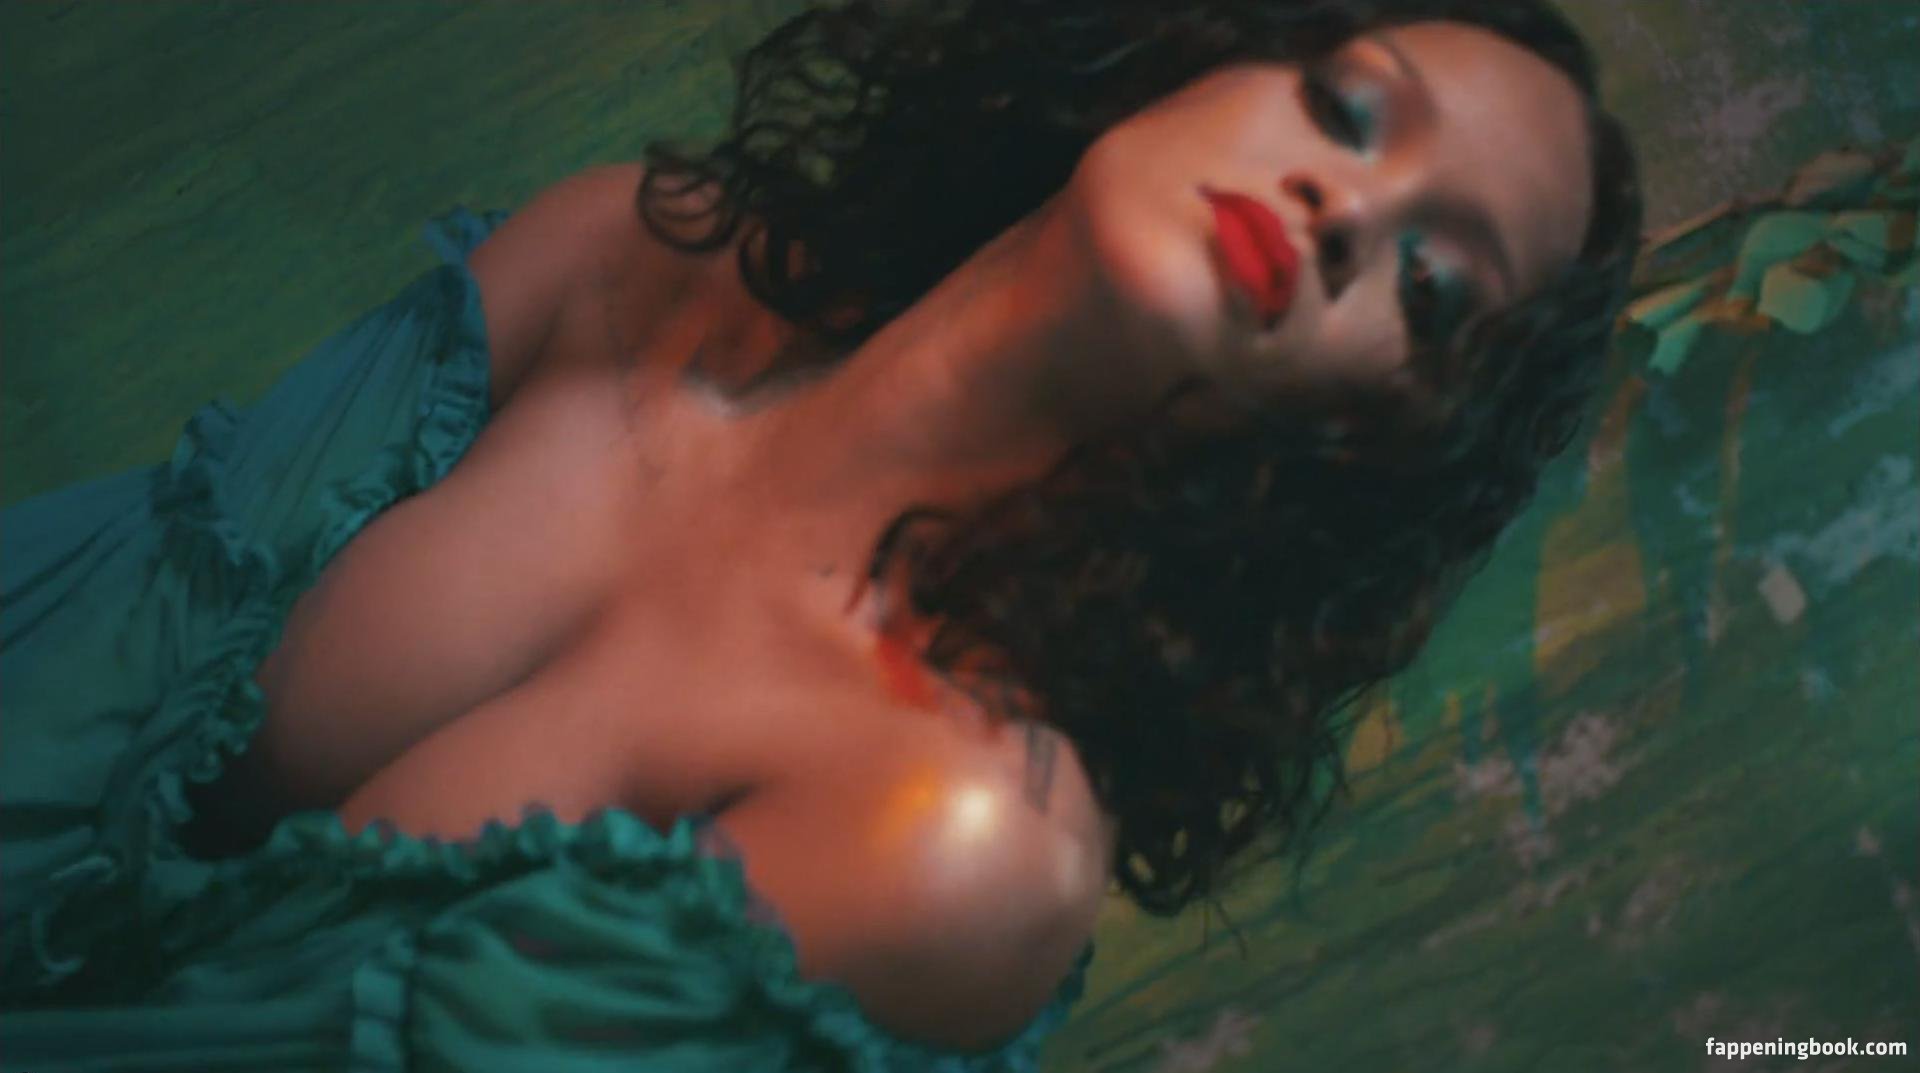 Rihanna Nude, The Fappening - Photo #456510 - FappeningBook